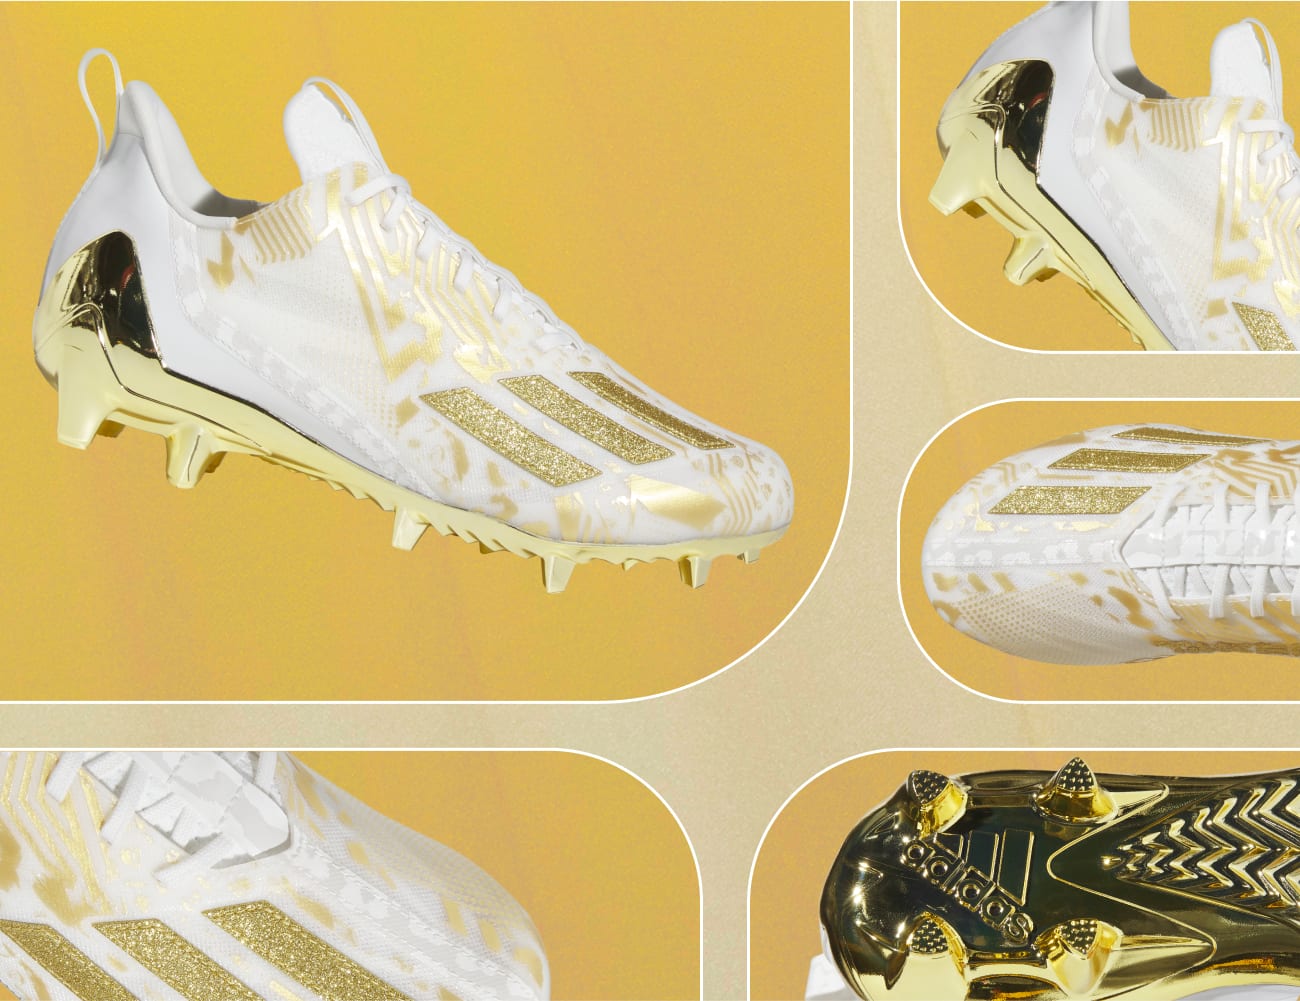 Will Baseball Cleats Work for Football? Find out if Baseball Cleats are Suitable for the Football Field!